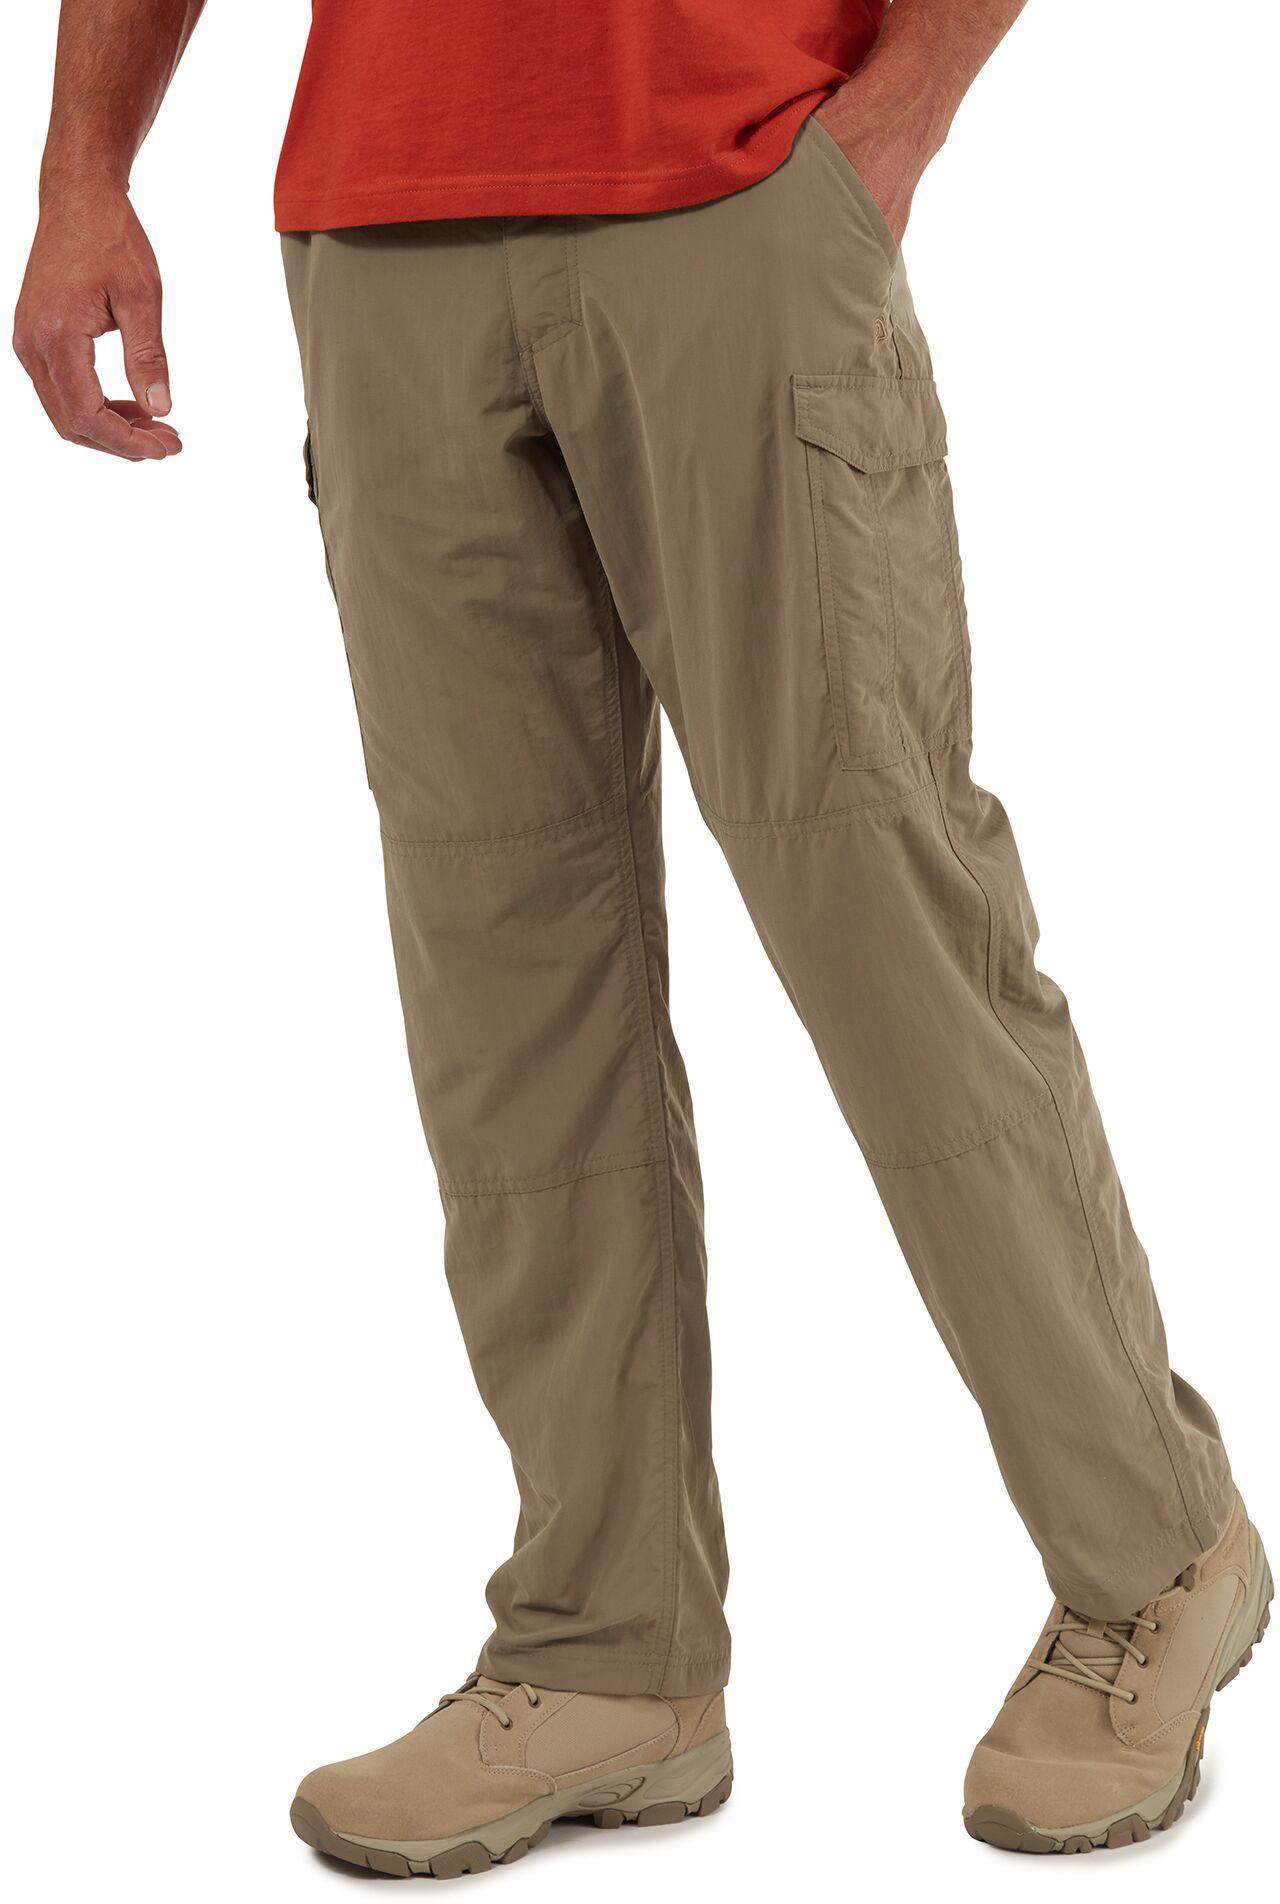 Short Craghoppers NosiLife Convertible Womens Walking Trousers Brown 